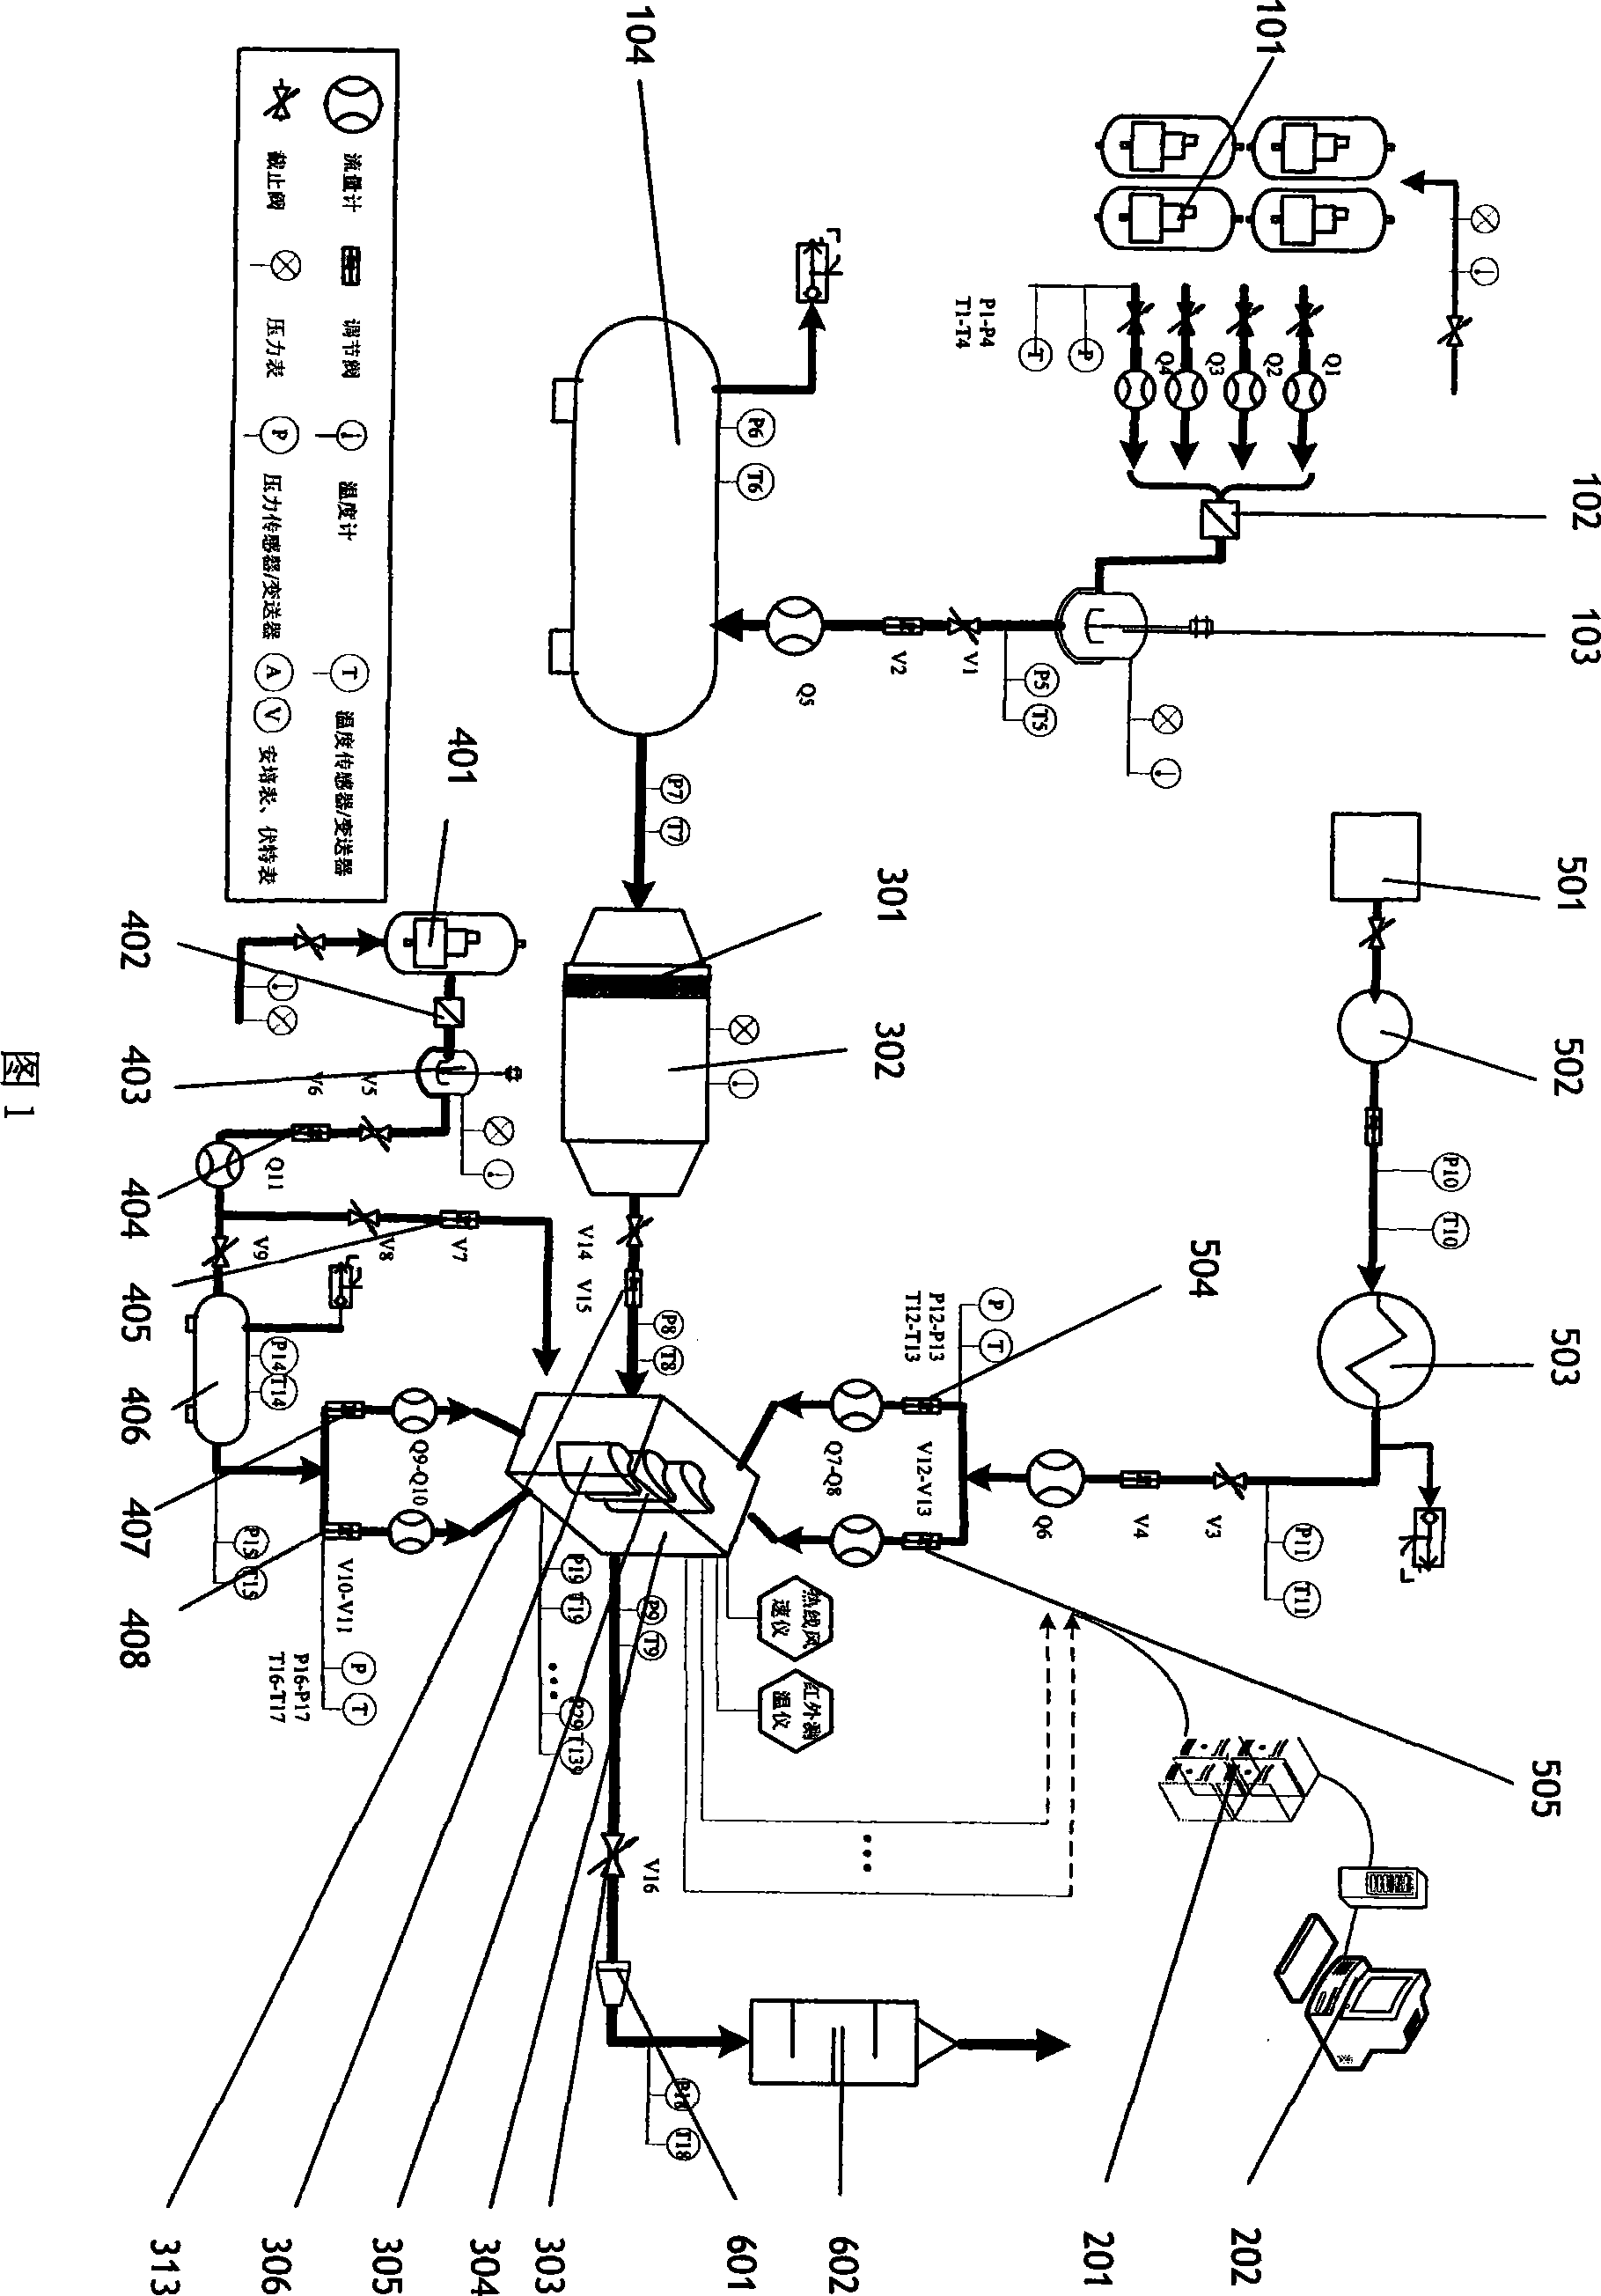 Double-working medium refrigeration experiment system used for turbine blade of gas turbine